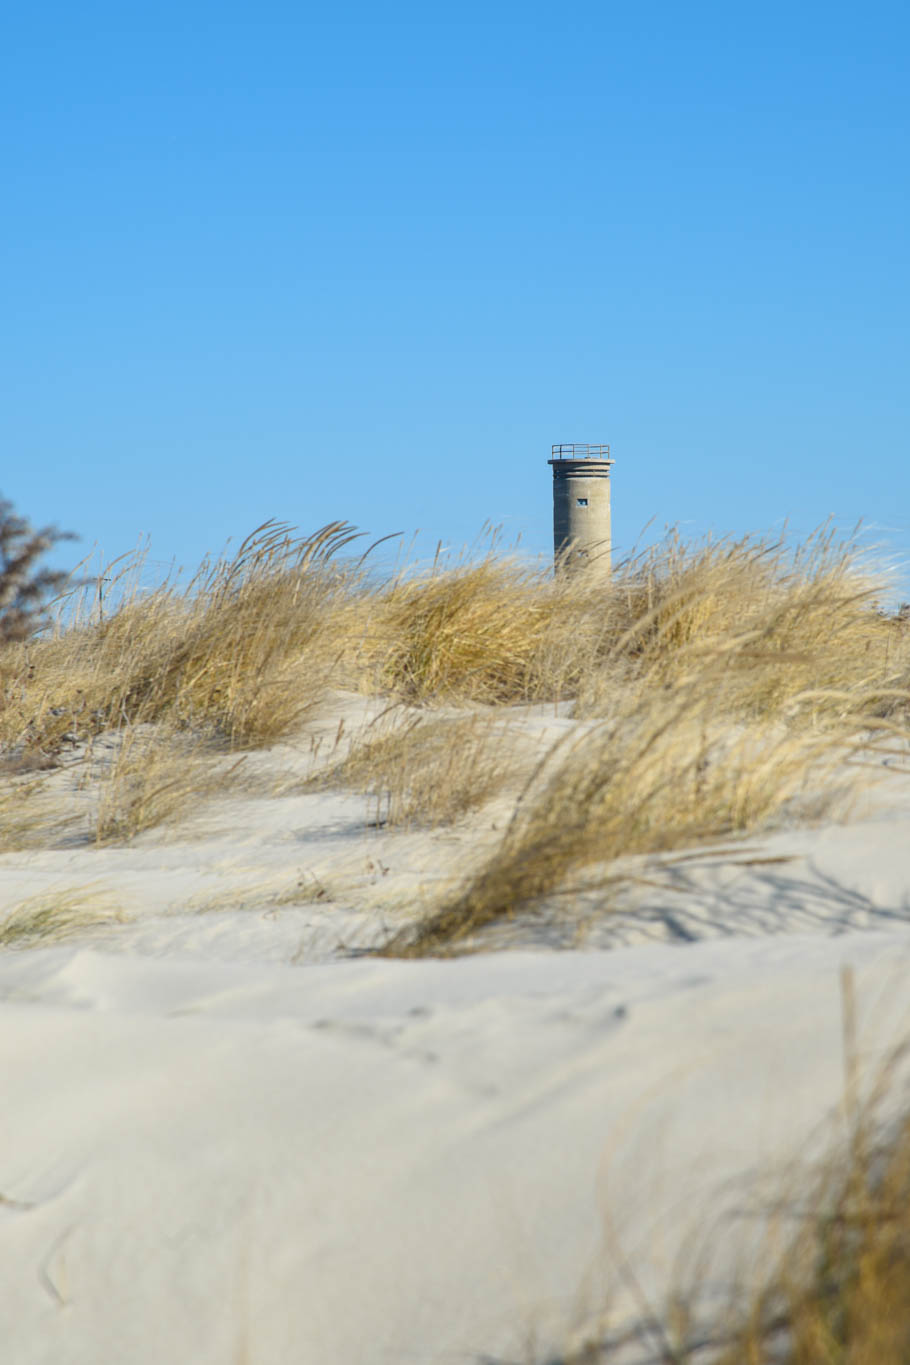 looking at the dunes and the World War II Lookout Tower